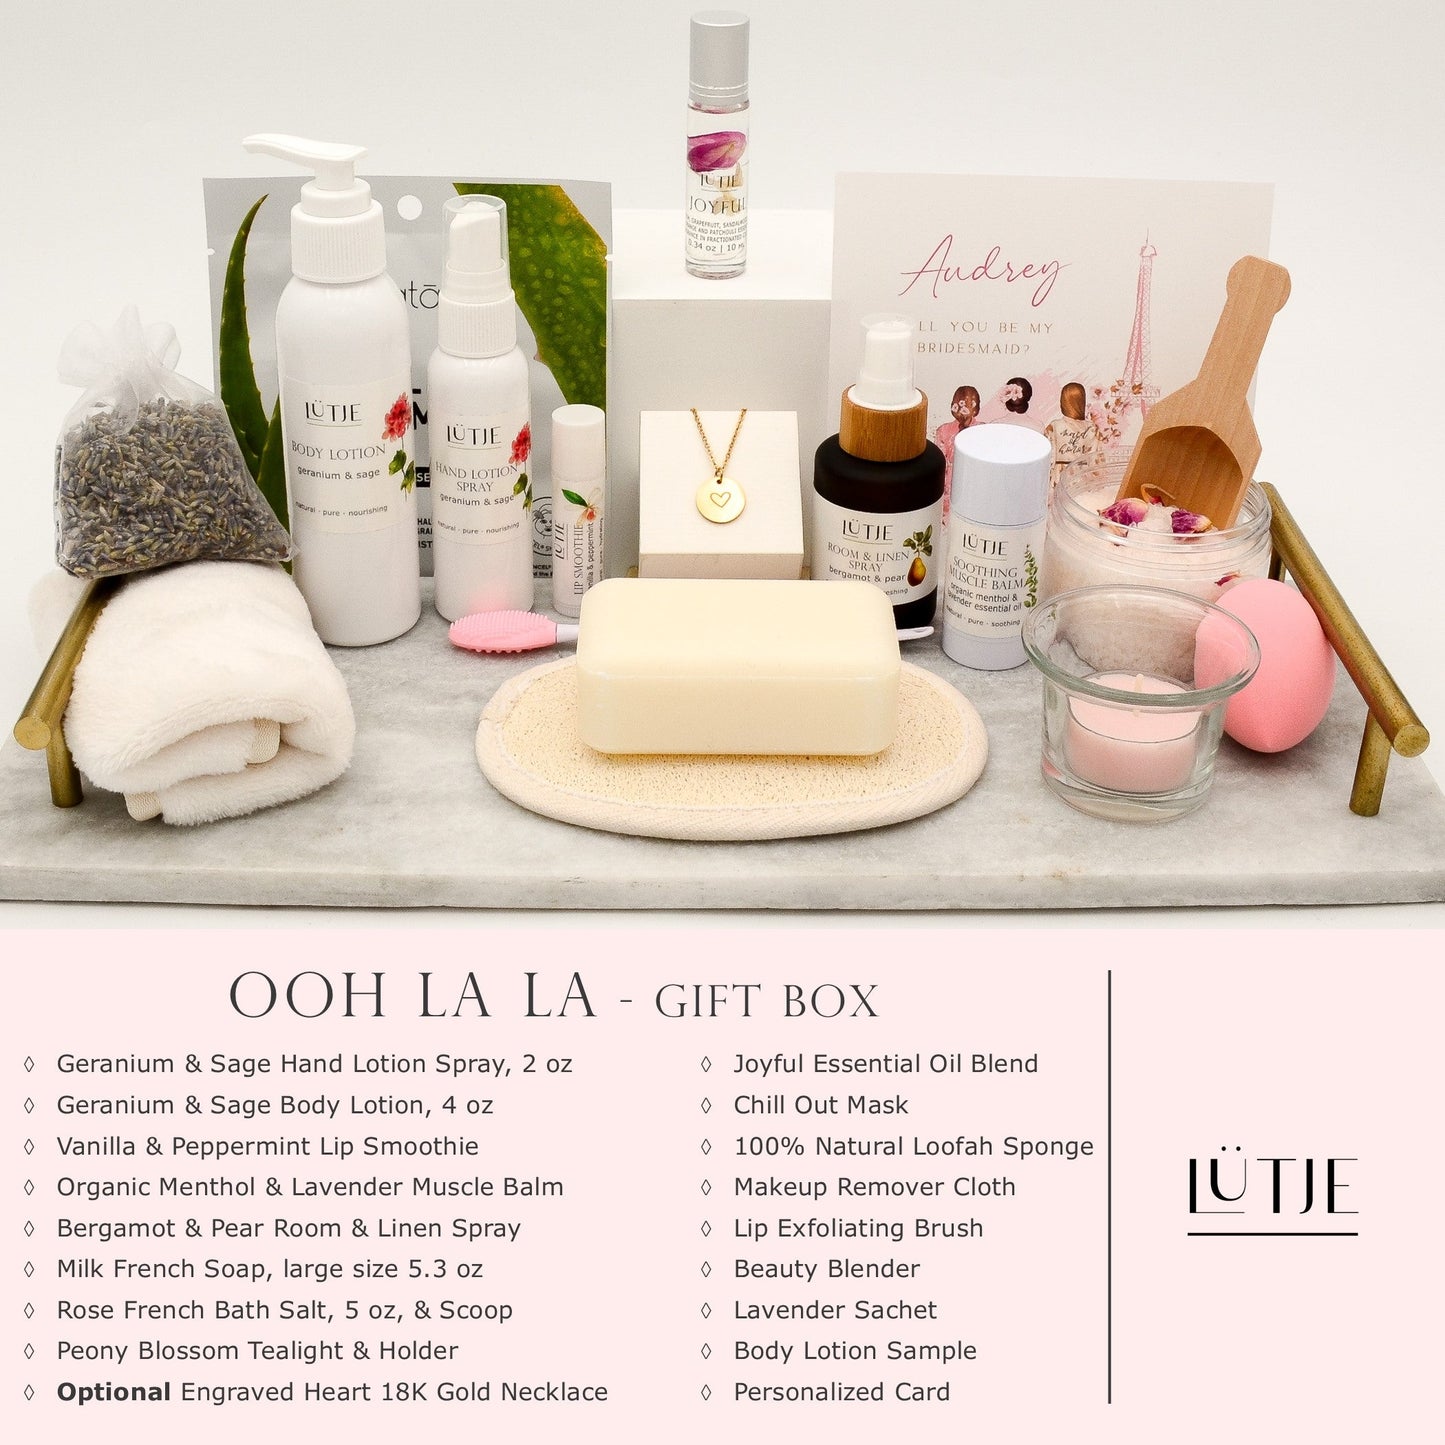 Ooh La La Gift Box for women, wife, daughter, BFF, sister, mom, or grandma, includes Geranium & Sage hand lotion spray and body lotion, essential oil, lip balm, soothing muscle balm, Bergamot & Pear room & linen spray, French soap, French bath salts, hydrating face mask, other bath, spa and self-care items, and 18K gold-plated necklace with engraved heart.